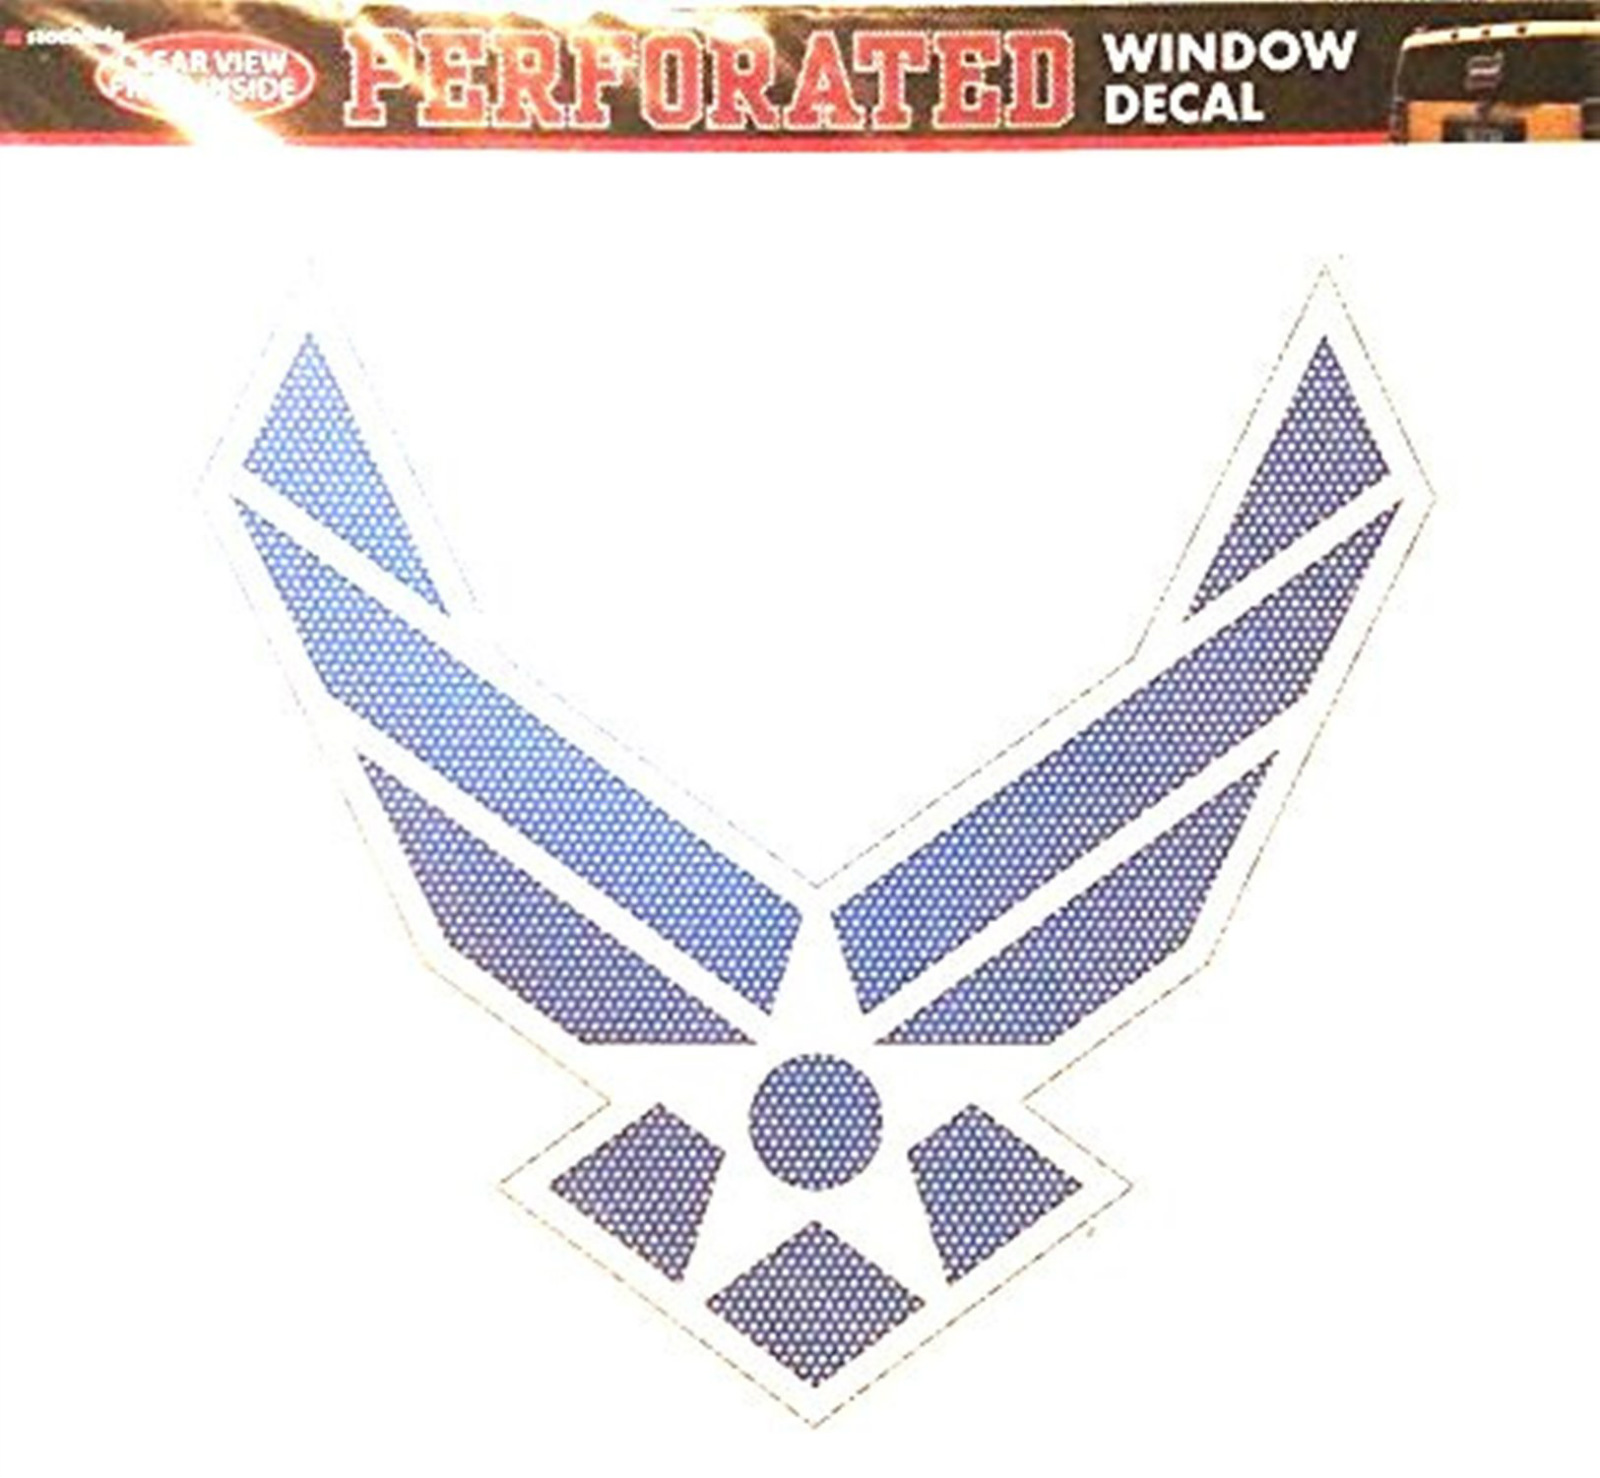 Air Force 6" DECAL Silver Metallic Style Vinyl Auto United States Military